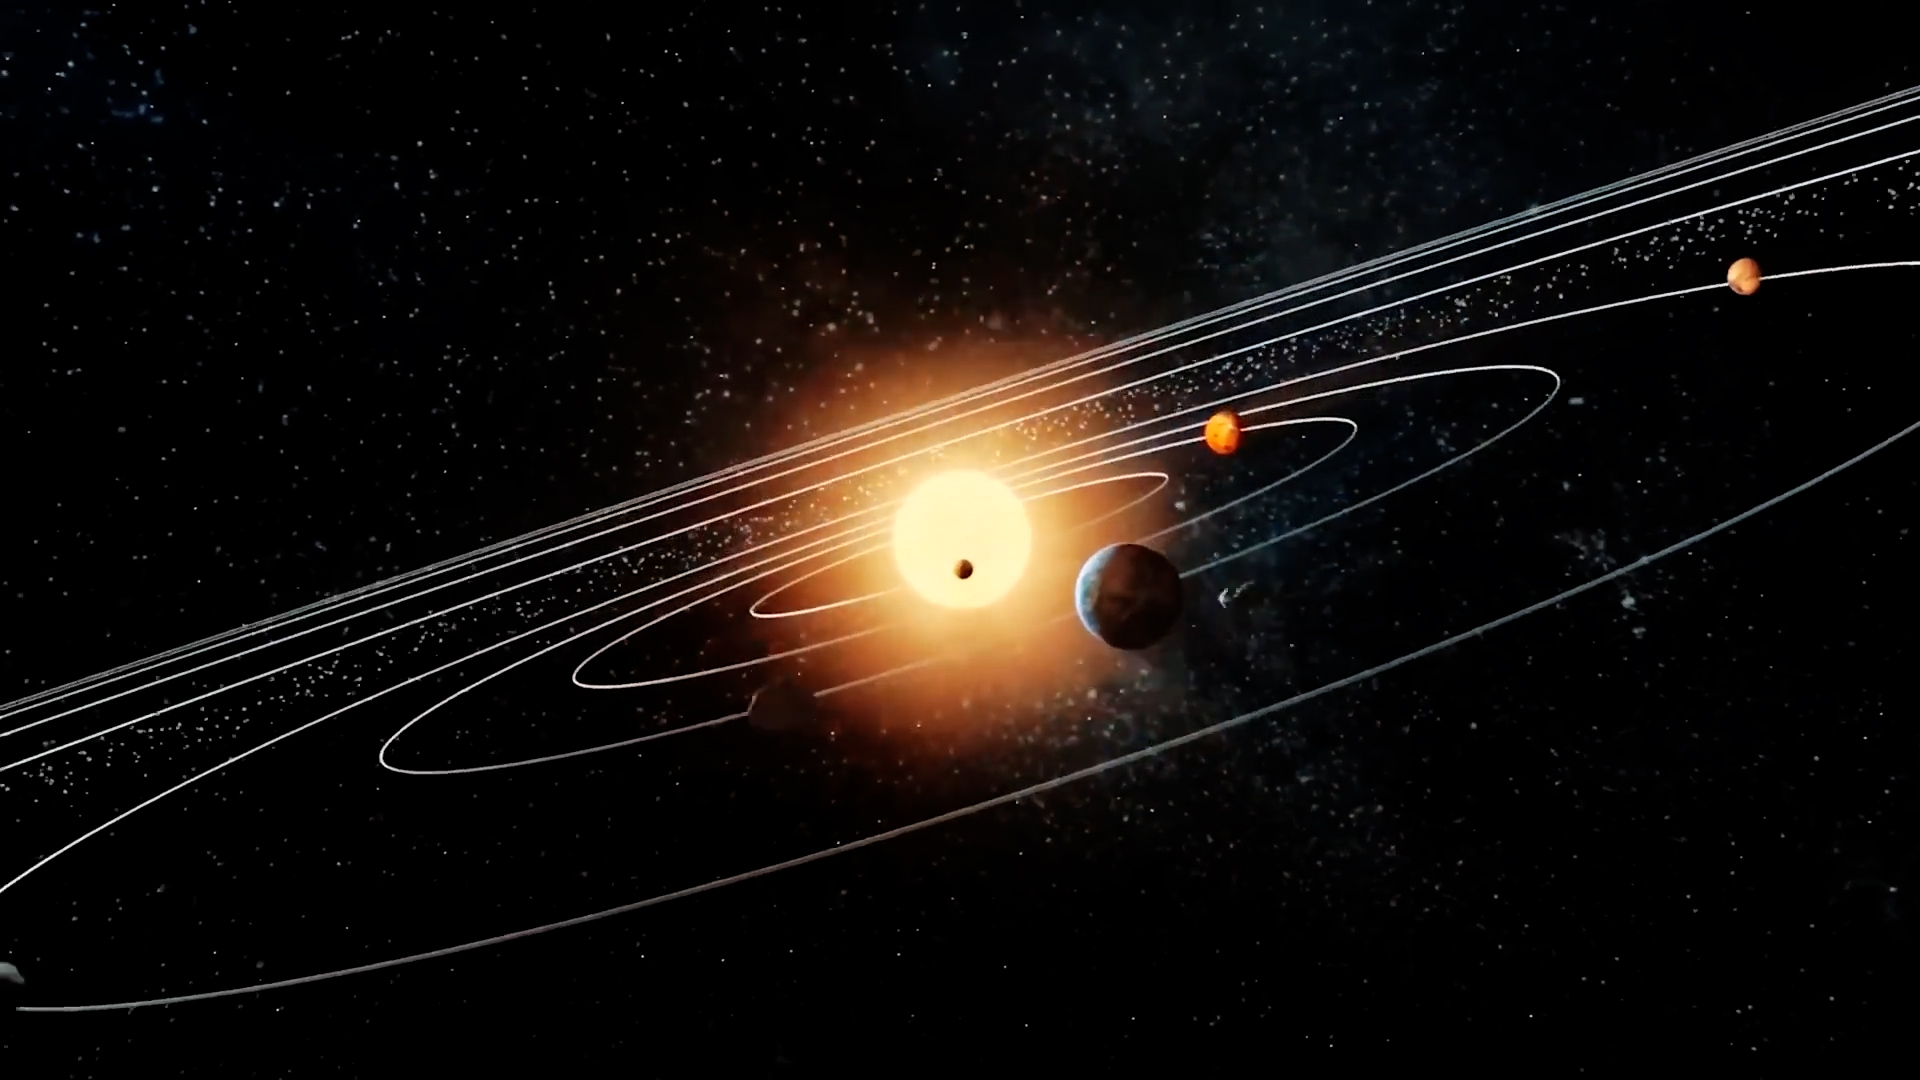 How the solar system moves in space